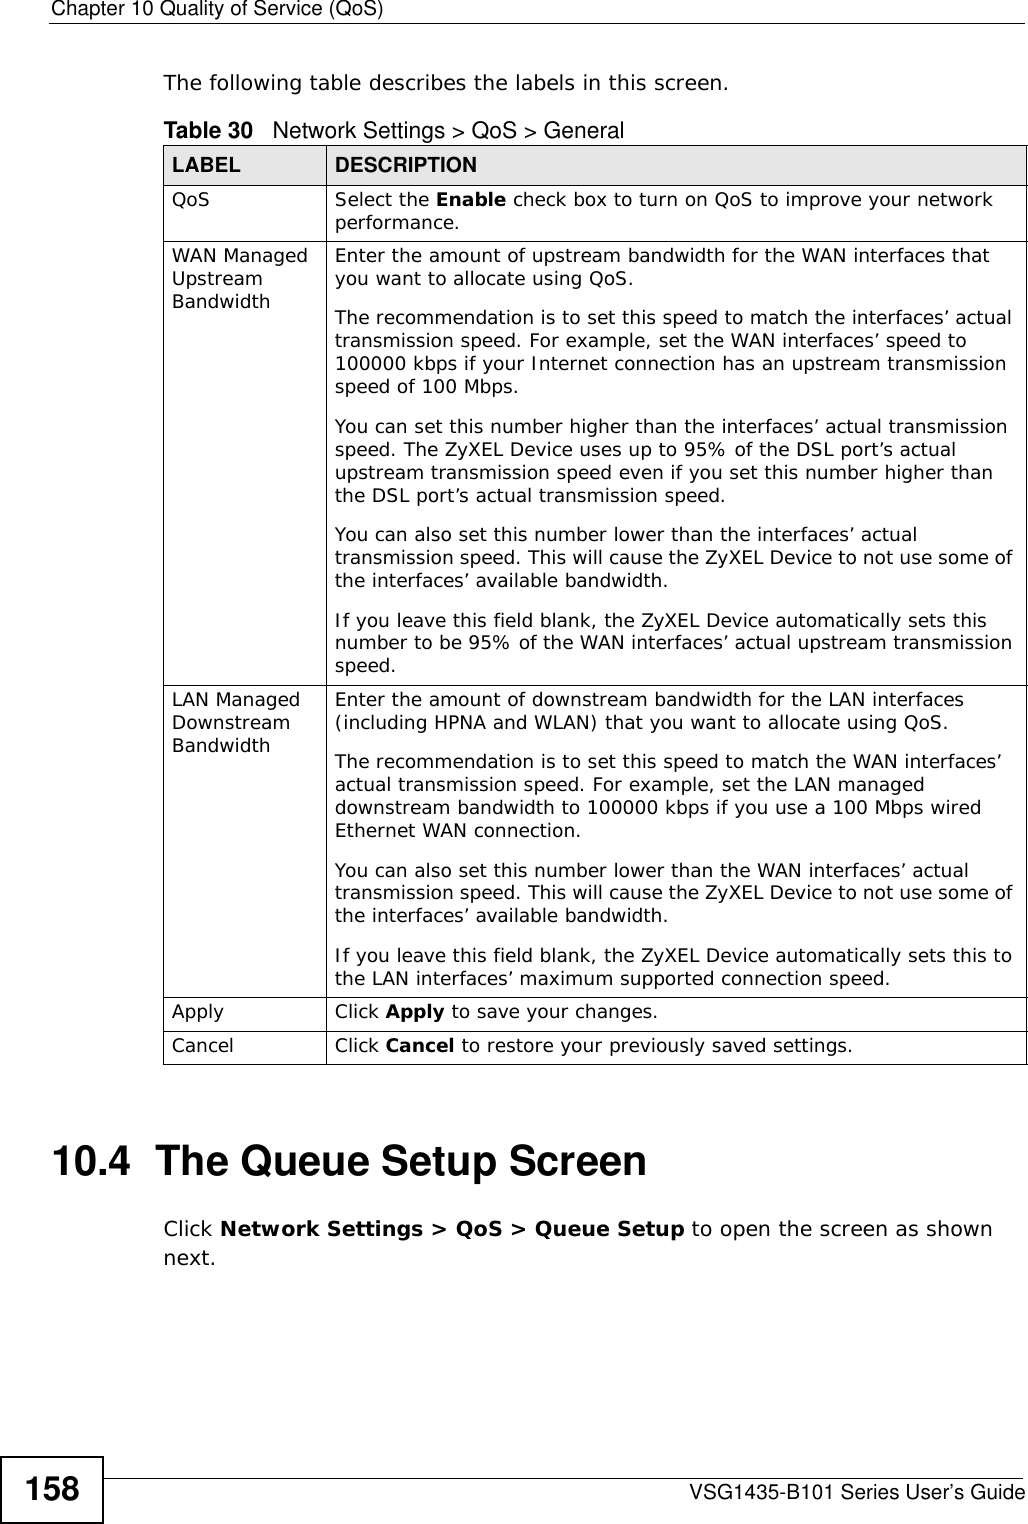 Chapter 10 Quality of Service (QoS)VSG1435-B101 Series User’s Guide158The following table describes the labels in this screen. 10.4  The Queue Setup ScreenClick Network Settings &gt; QoS &gt; Queue Setup to open the screen as shown next. Table 30   Network Settings &gt; QoS &gt; GeneralLABEL DESCRIPTIONQoS Select the Enable check box to turn on QoS to improve your network performance. WAN Managed Upstream Bandwidth Enter the amount of upstream bandwidth for the WAN interfaces that you want to allocate using QoS. The recommendation is to set this speed to match the interfaces’ actual transmission speed. For example, set the WAN interfaces’ speed to 100000 kbps if your Internet connection has an upstream transmission speed of 100 Mbps.        You can set this number higher than the interfaces’ actual transmission speed. The ZyXEL Device uses up to 95% of the DSL port’s actual upstream transmission speed even if you set this number higher than the DSL port’s actual transmission speed.You can also set this number lower than the interfaces’ actual transmission speed. This will cause the ZyXEL Device to not use some of the interfaces’ available bandwidth.If you leave this field blank, the ZyXEL Device automatically sets this number to be 95% of the WAN interfaces’ actual upstream transmission speed.LAN Managed Downstream Bandwidth Enter the amount of downstream bandwidth for the LAN interfaces (including HPNA and WLAN) that you want to allocate using QoS. The recommendation is to set this speed to match the WAN interfaces’ actual transmission speed. For example, set the LAN managed downstream bandwidth to 100000 kbps if you use a 100 Mbps wired Ethernet WAN connection.        You can also set this number lower than the WAN interfaces’ actual transmission speed. This will cause the ZyXEL Device to not use some of the interfaces’ available bandwidth.If you leave this field blank, the ZyXEL Device automatically sets this to the LAN interfaces’ maximum supported connection speed.Apply Click Apply to save your changes.Cancel Click Cancel to restore your previously saved settings.